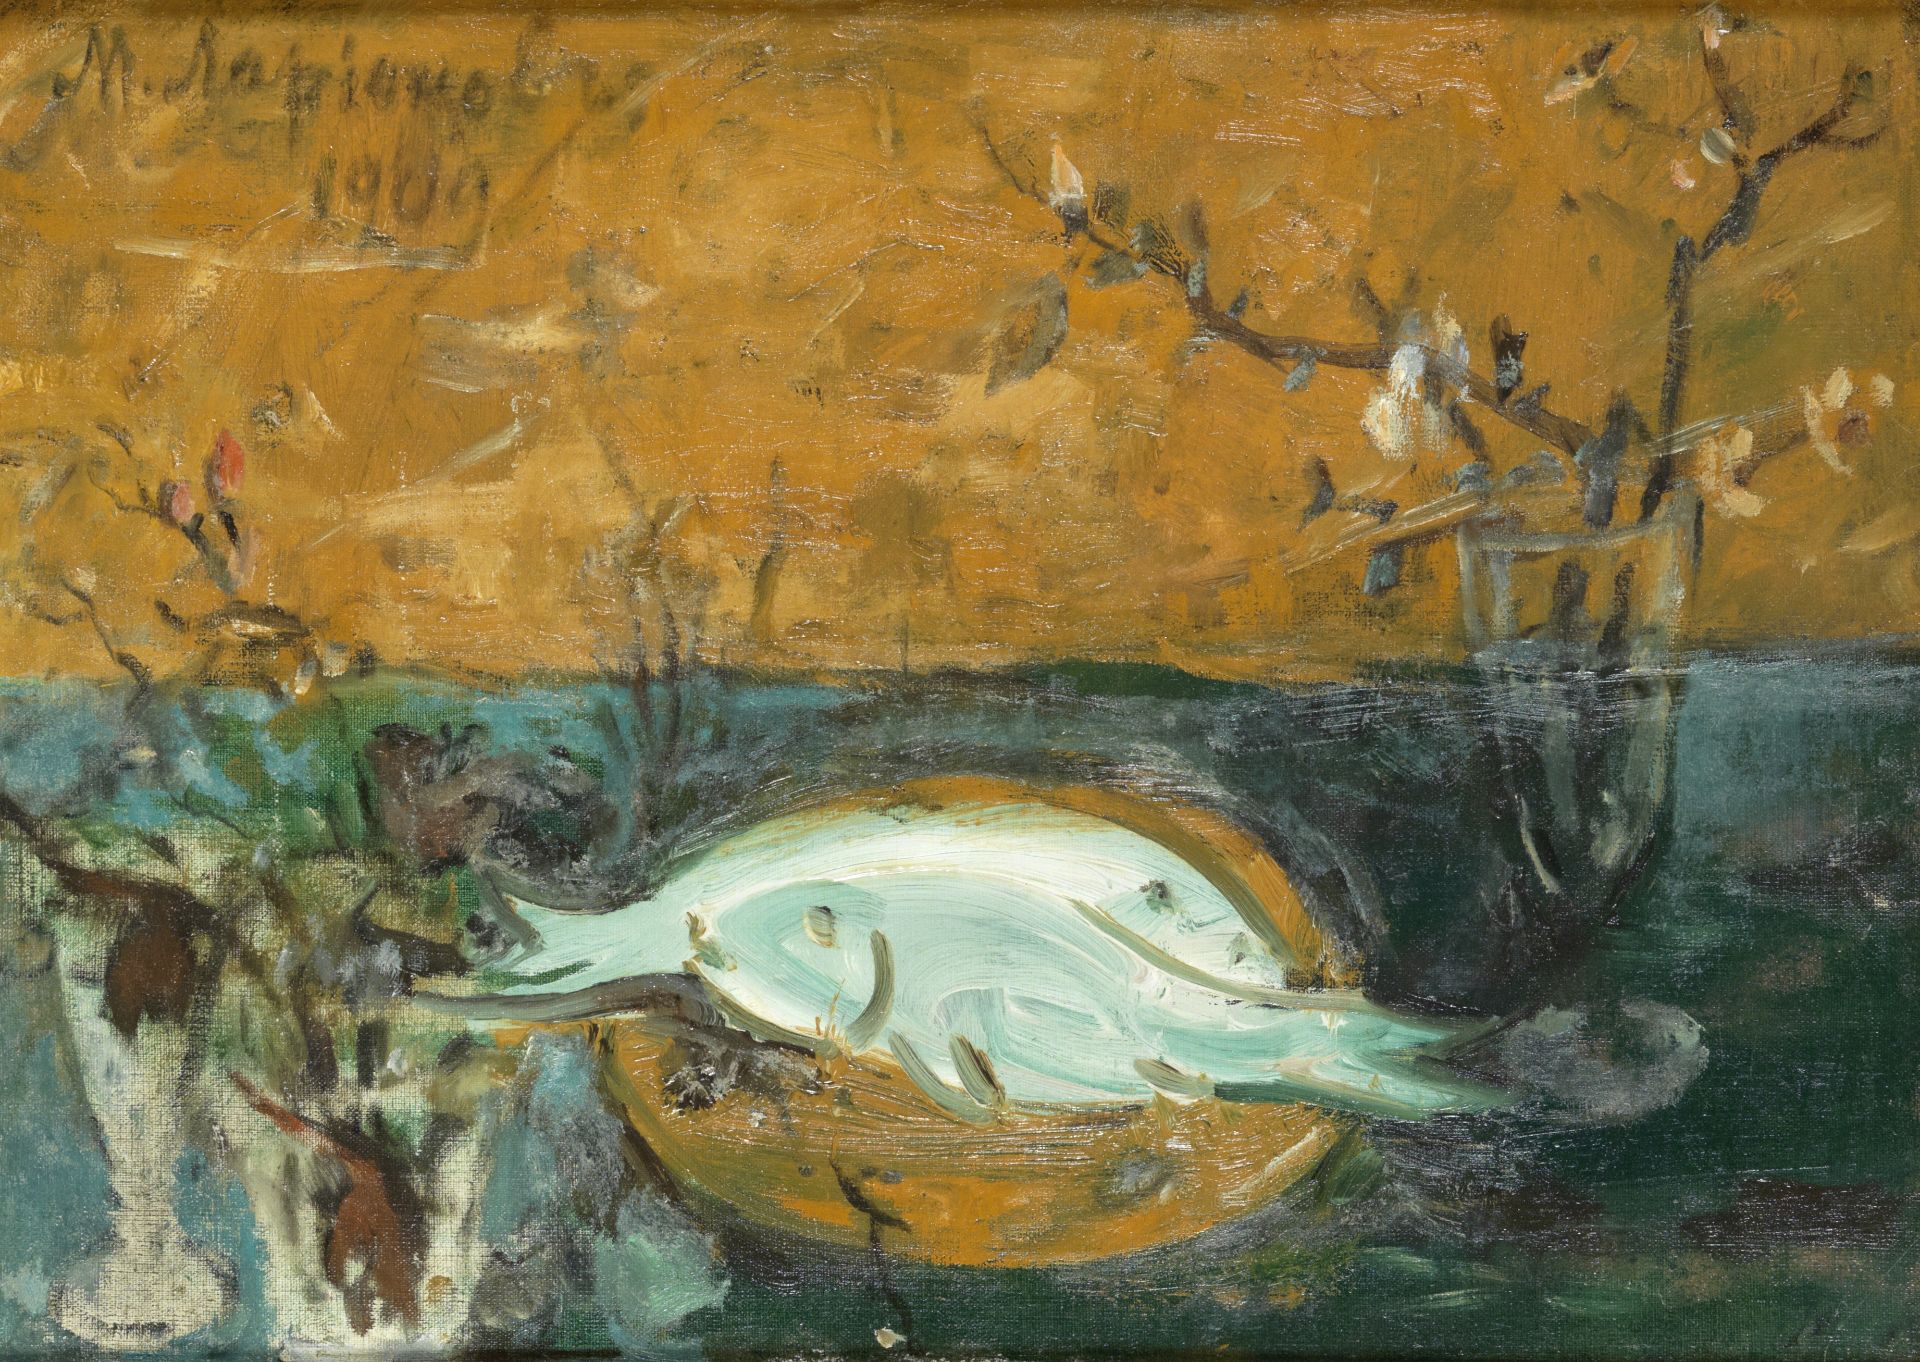 Mikhail Fedorovich Larionov (Russian/French, 1881-1964) Still life with fish and flowers